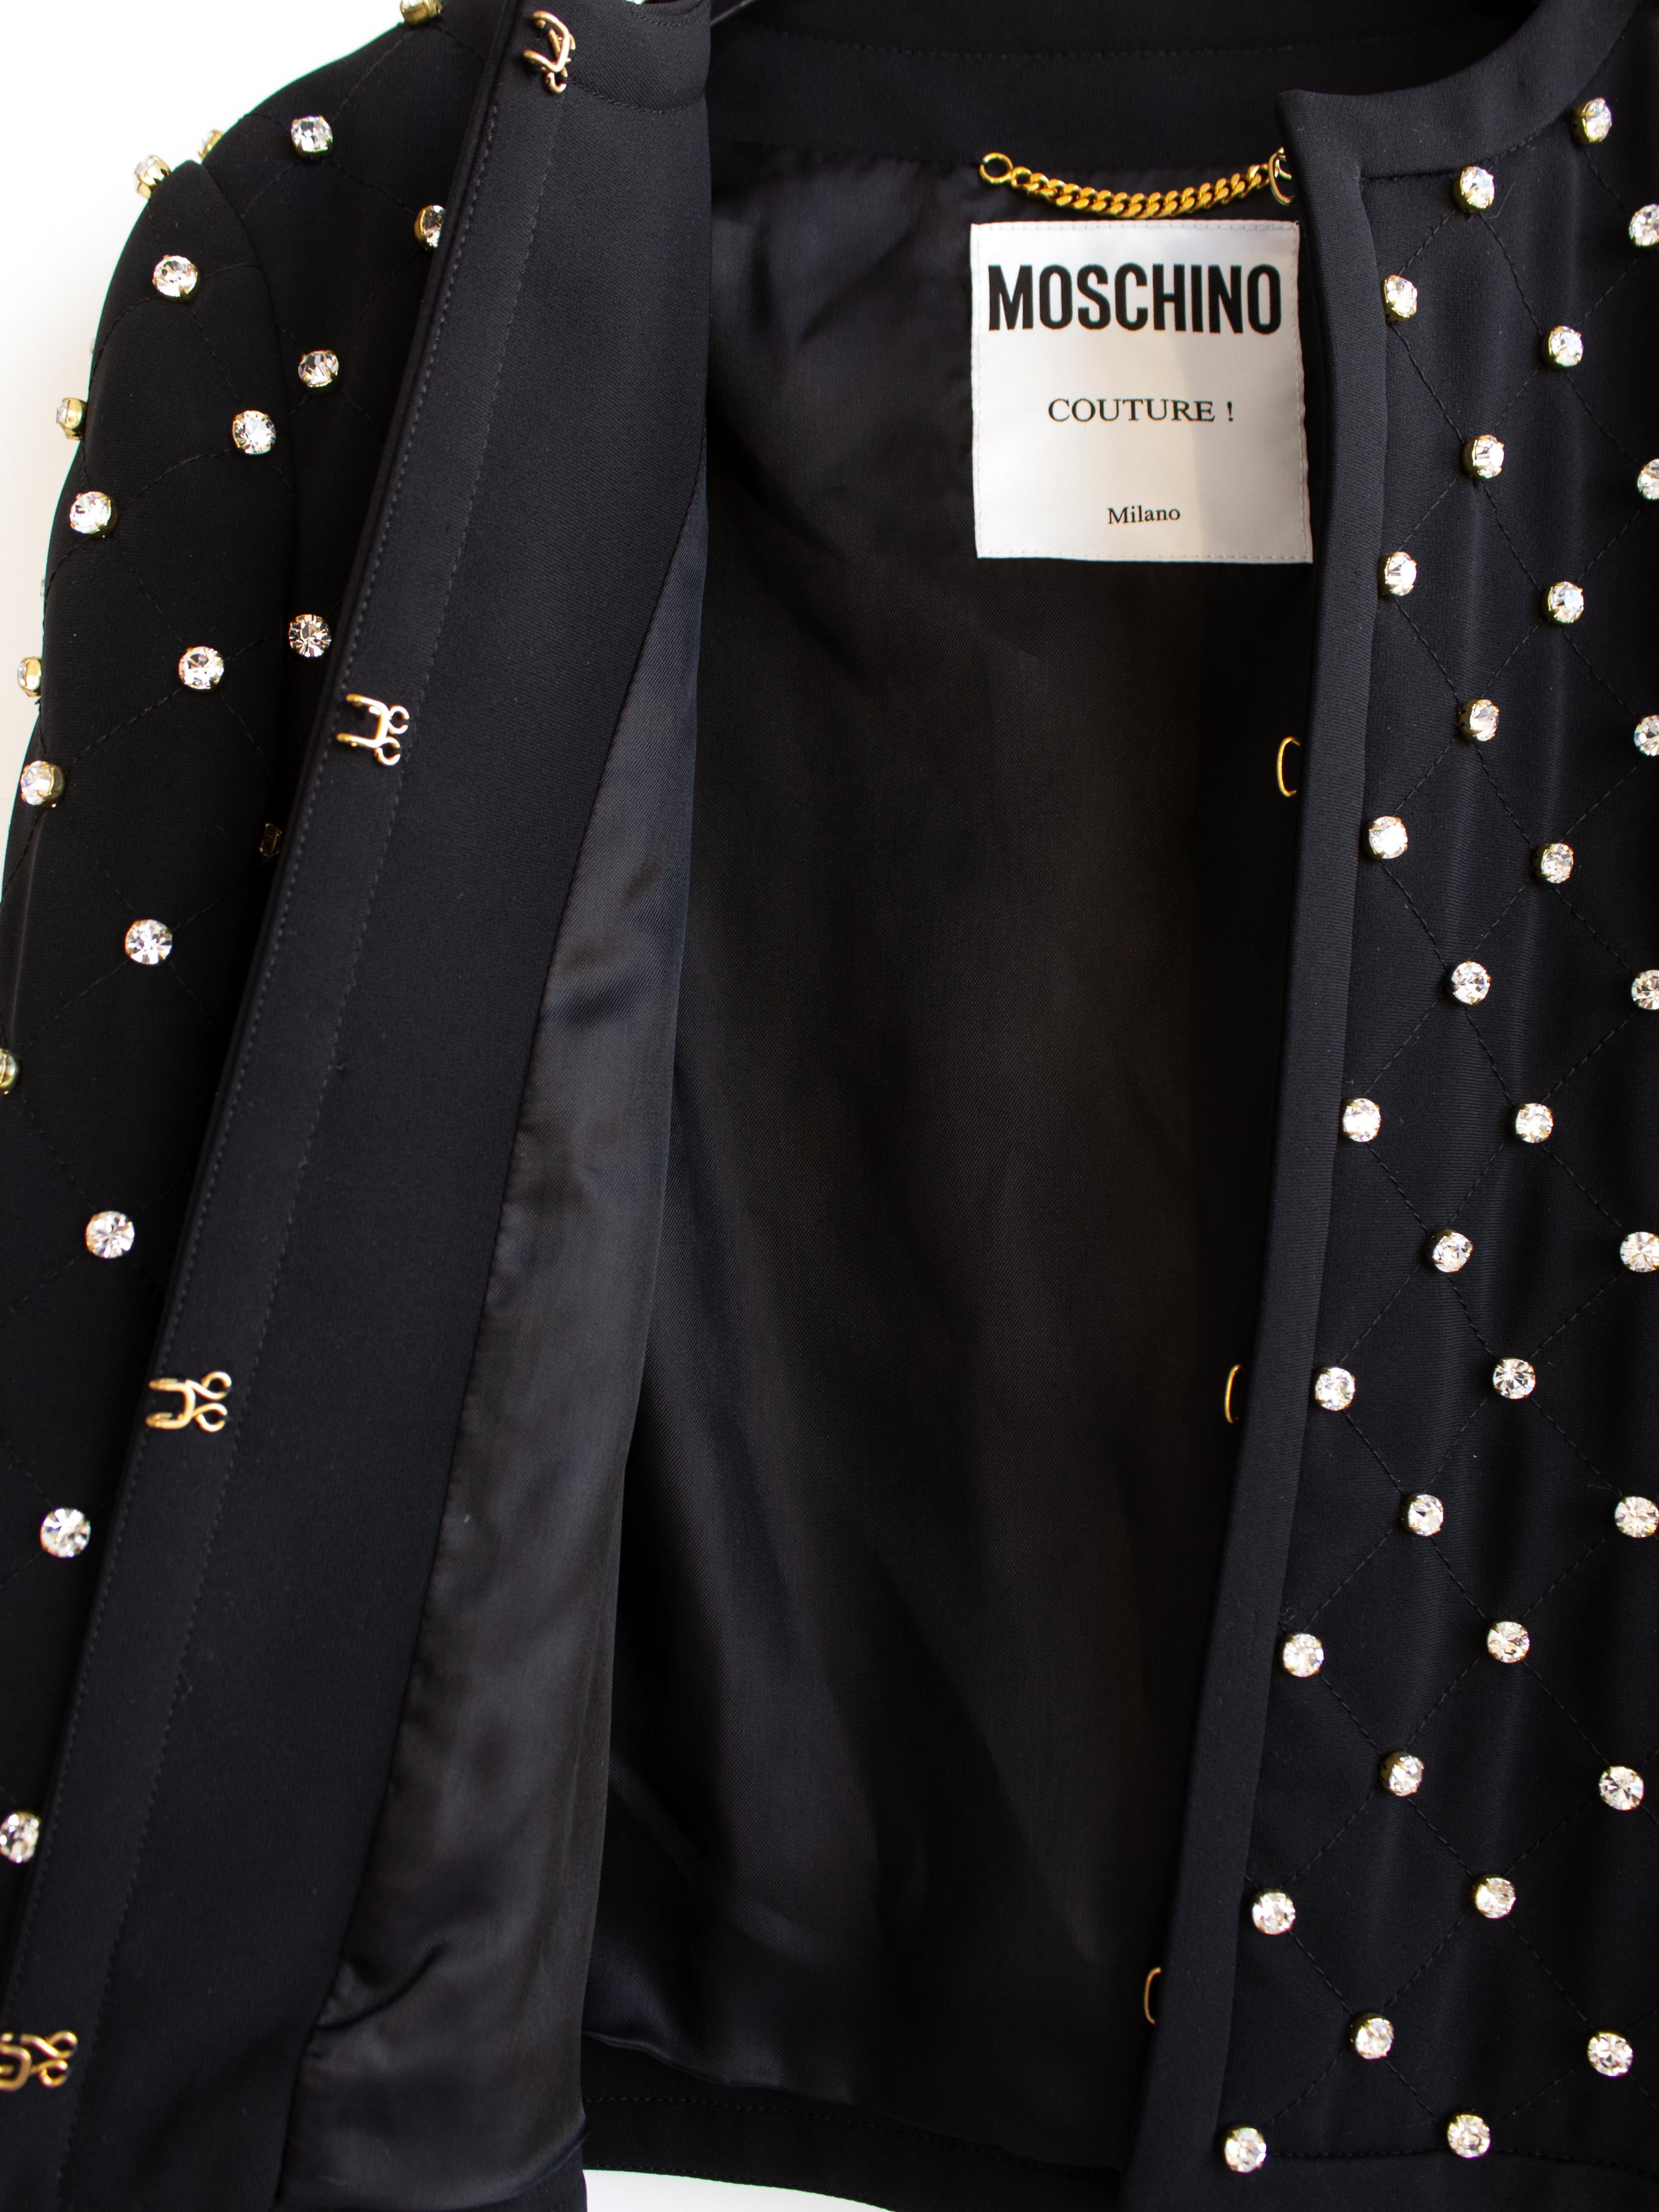 Moschino Couture S/S 2015 Barbie Crystal Embellished Rhinestone Black Jacket For Sale 7